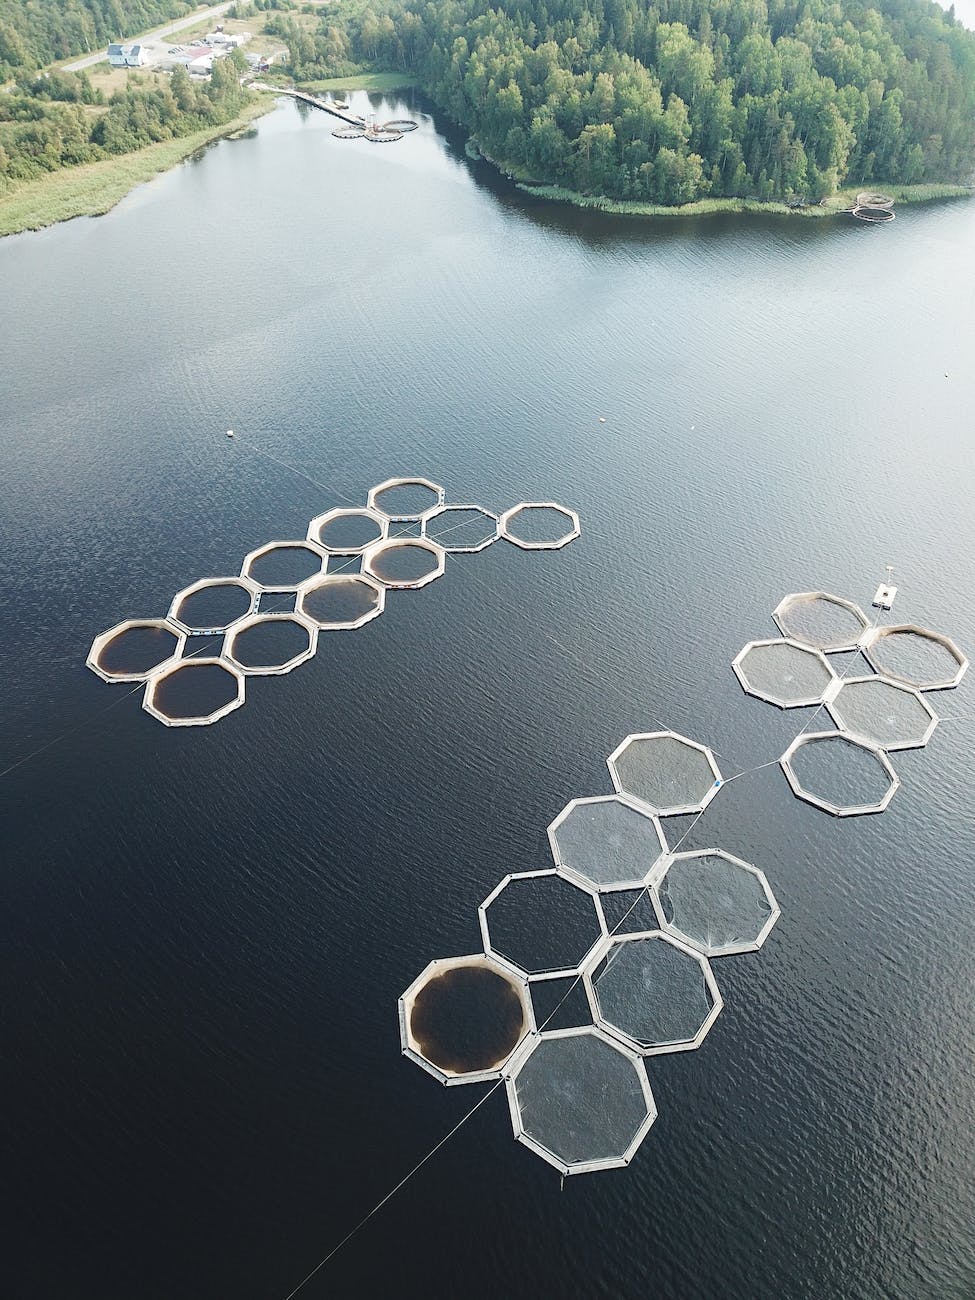 octagon shaped fish pens in the lake